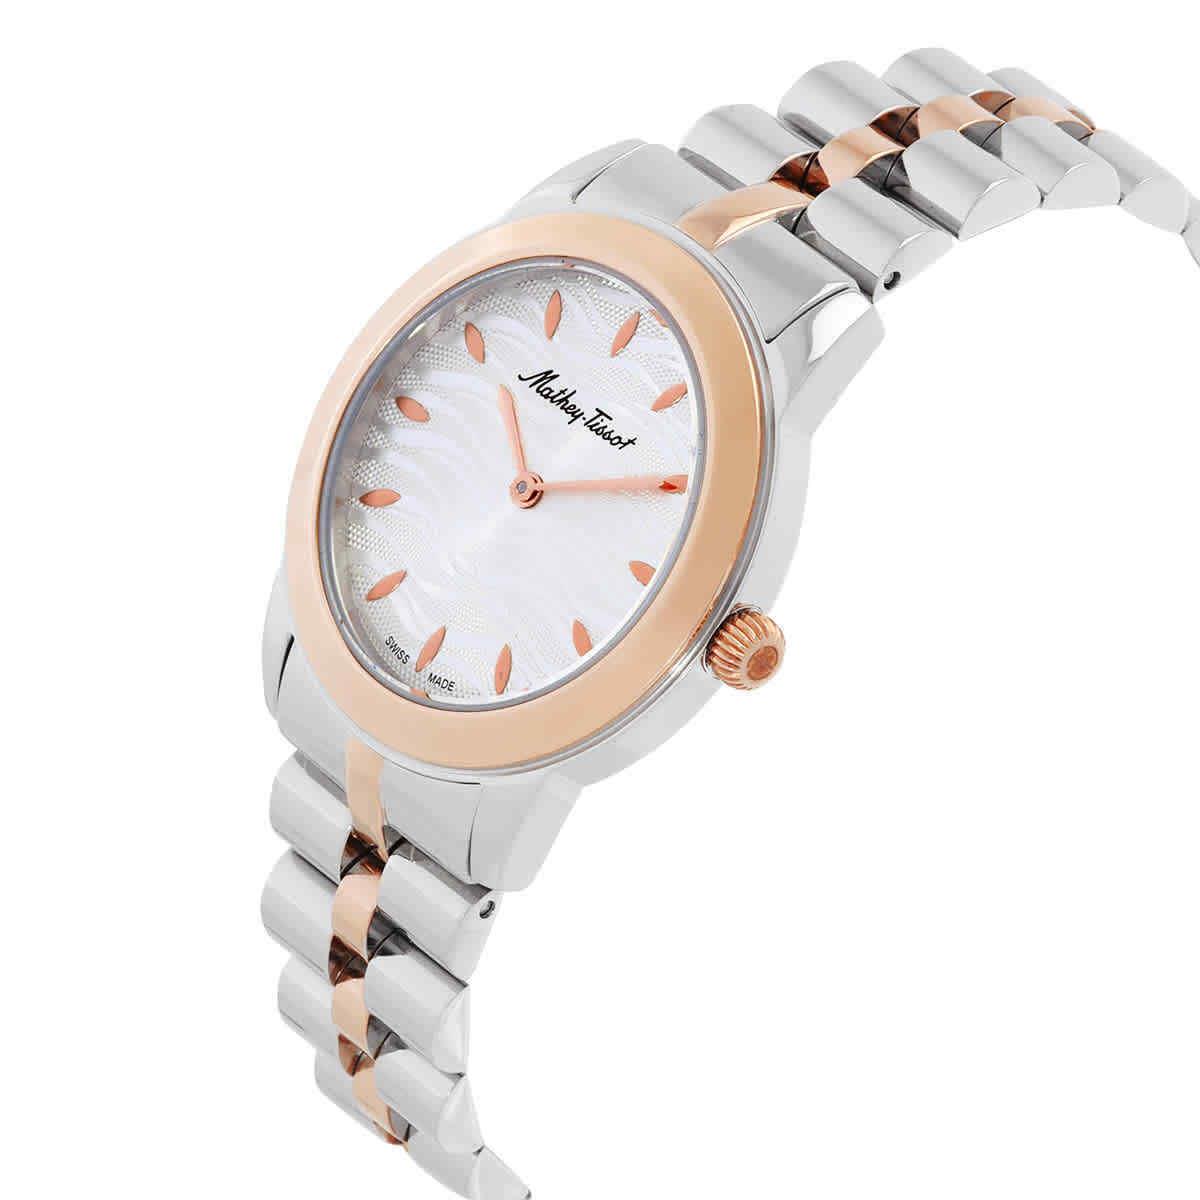 Mathey-tissot Artemis Quartz Silver Dial Ladies Watch D10860BS - Dial: Silver, Band: Two-tone (Silver-tone and Rose Gold PVD), Bezel: Silver-tone